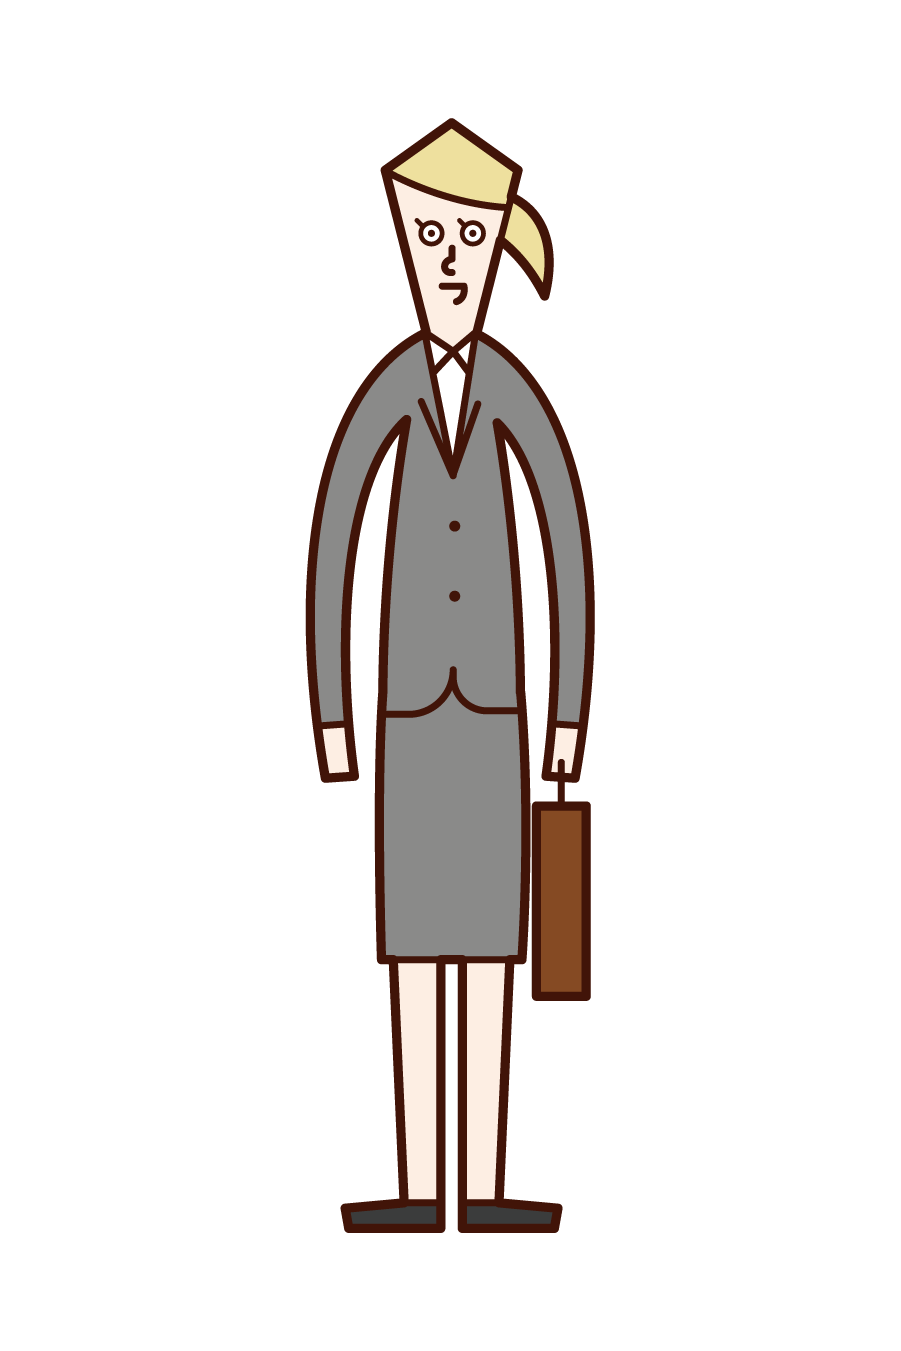 Illustrations of woman employees and office workers